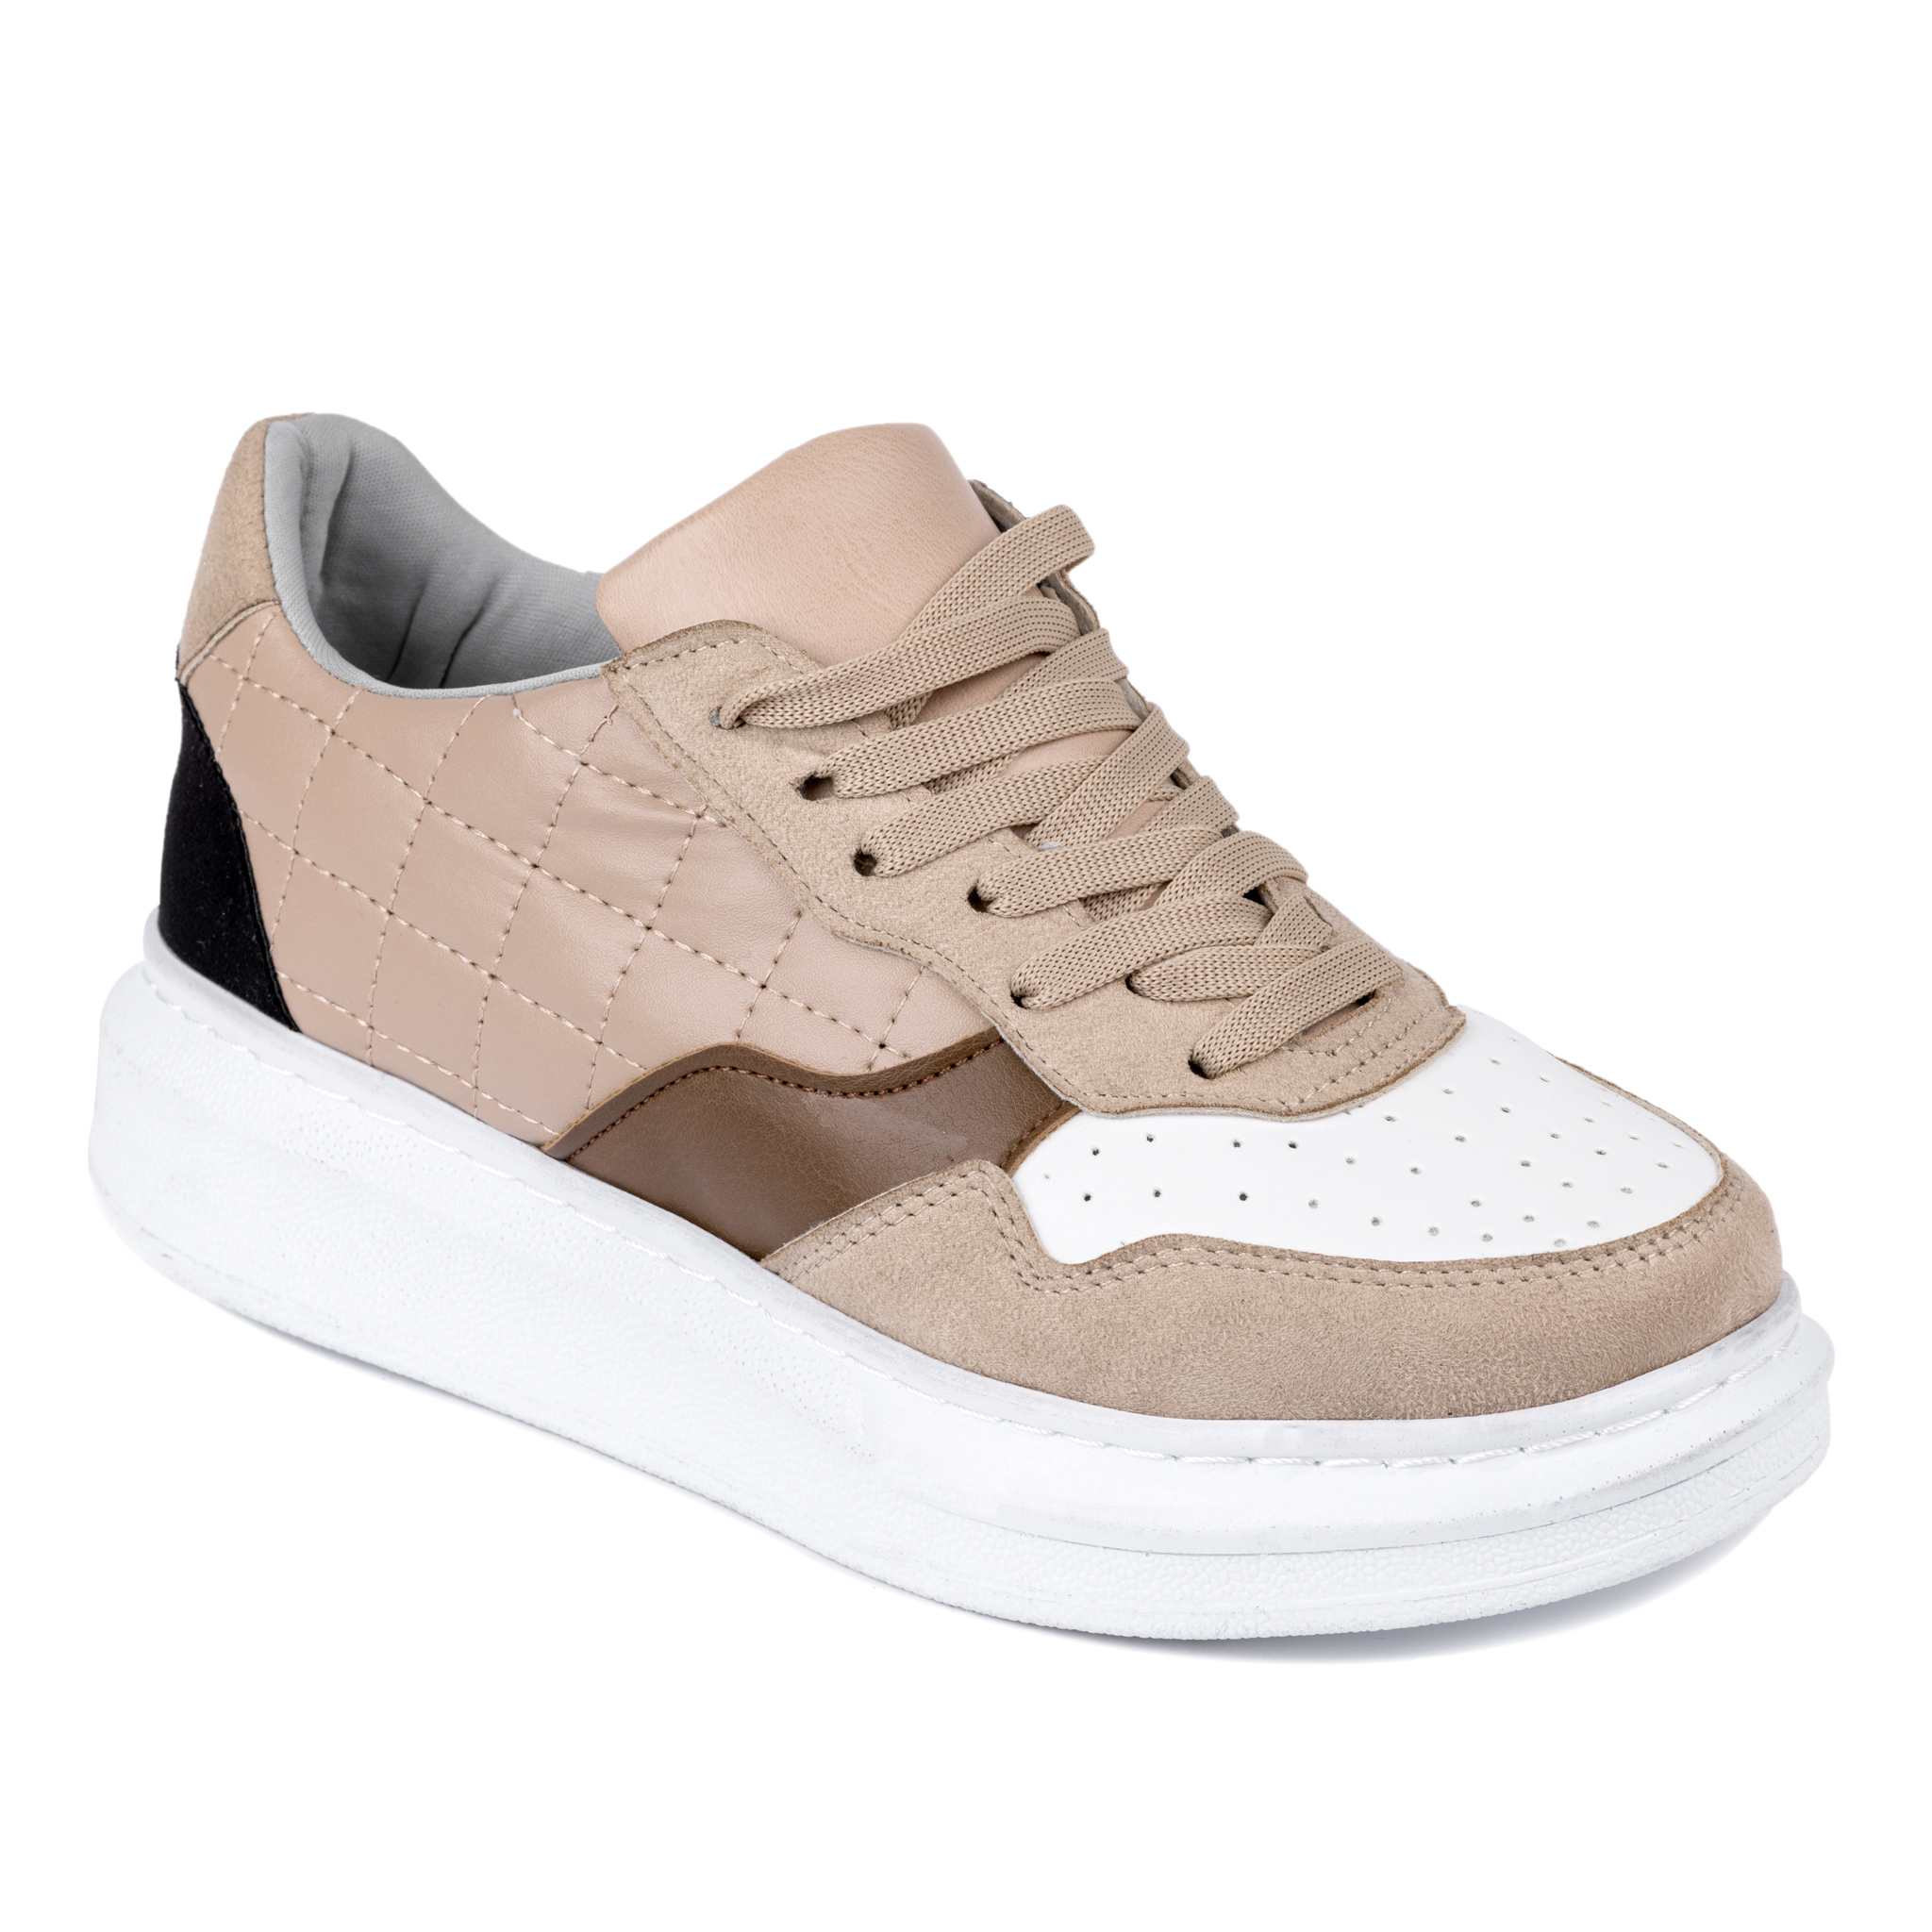 SAW SNEAKERS WITH HIGH SOLE - BEIGE